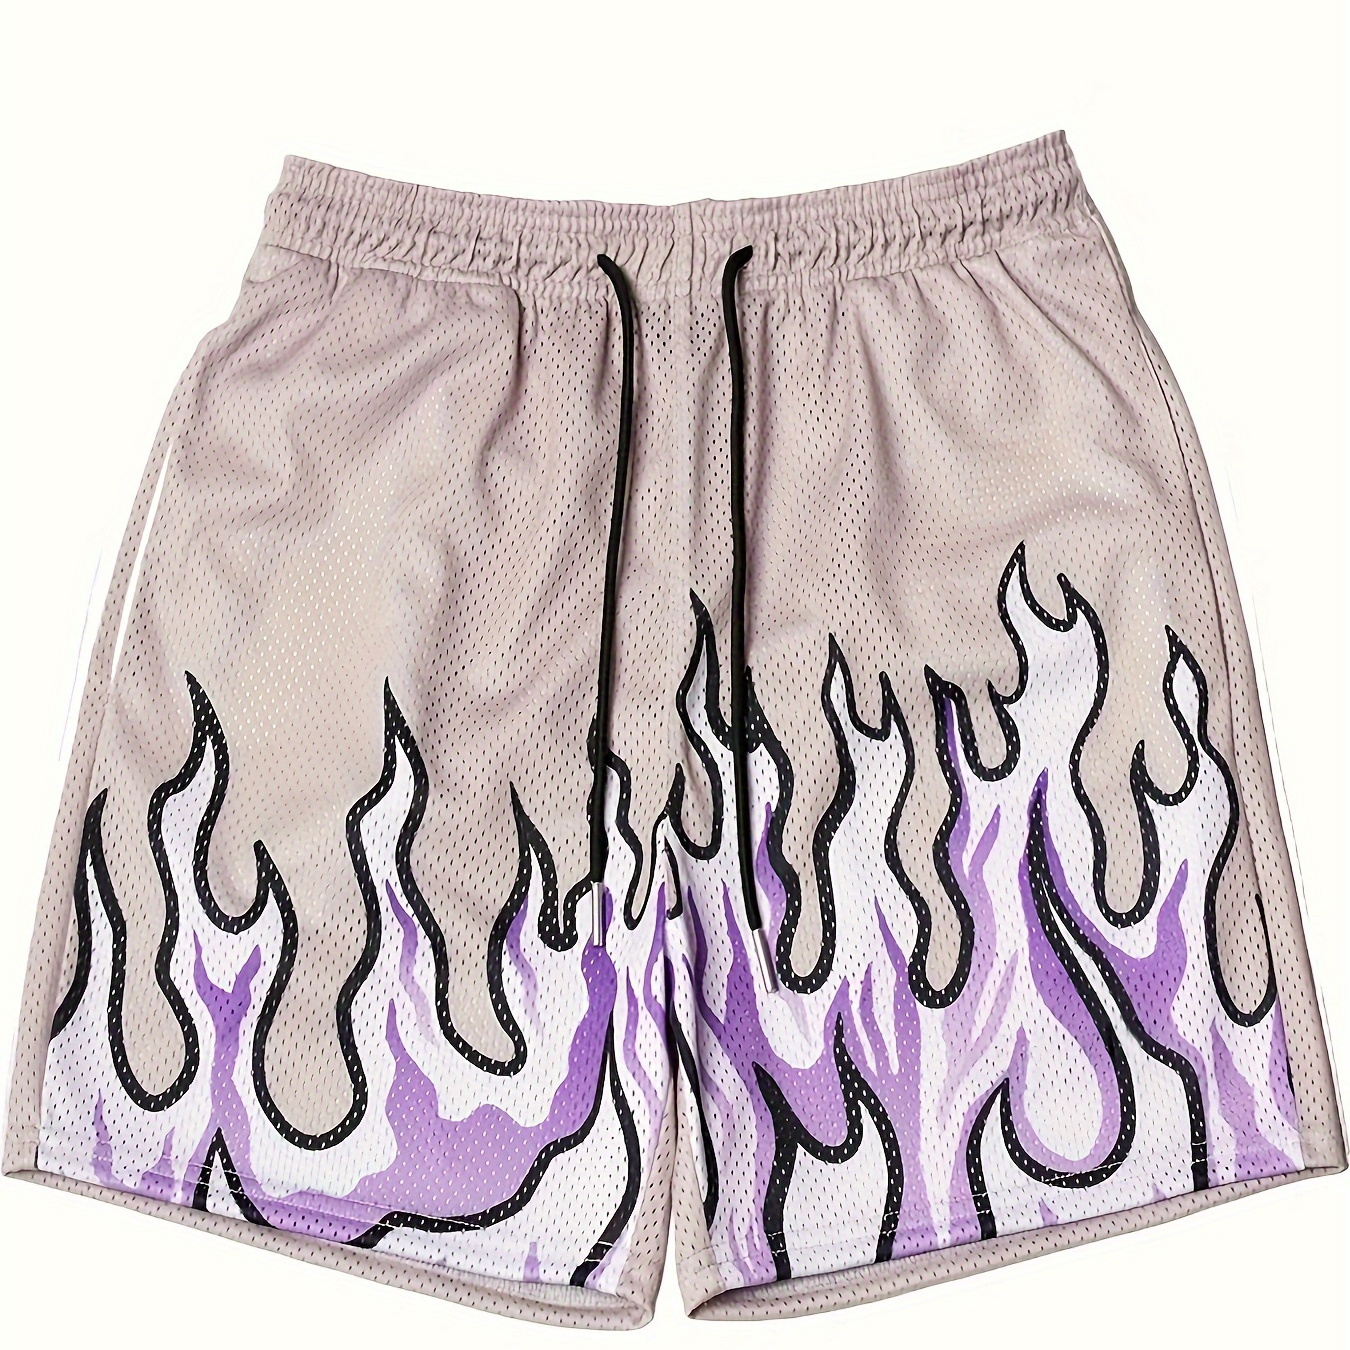 

Men's Stylish Loose Fire Pattern Short With Pockets, Casual Breathable Comfy Drawstring Short For City Walk Street Hanging Outdoor Activities